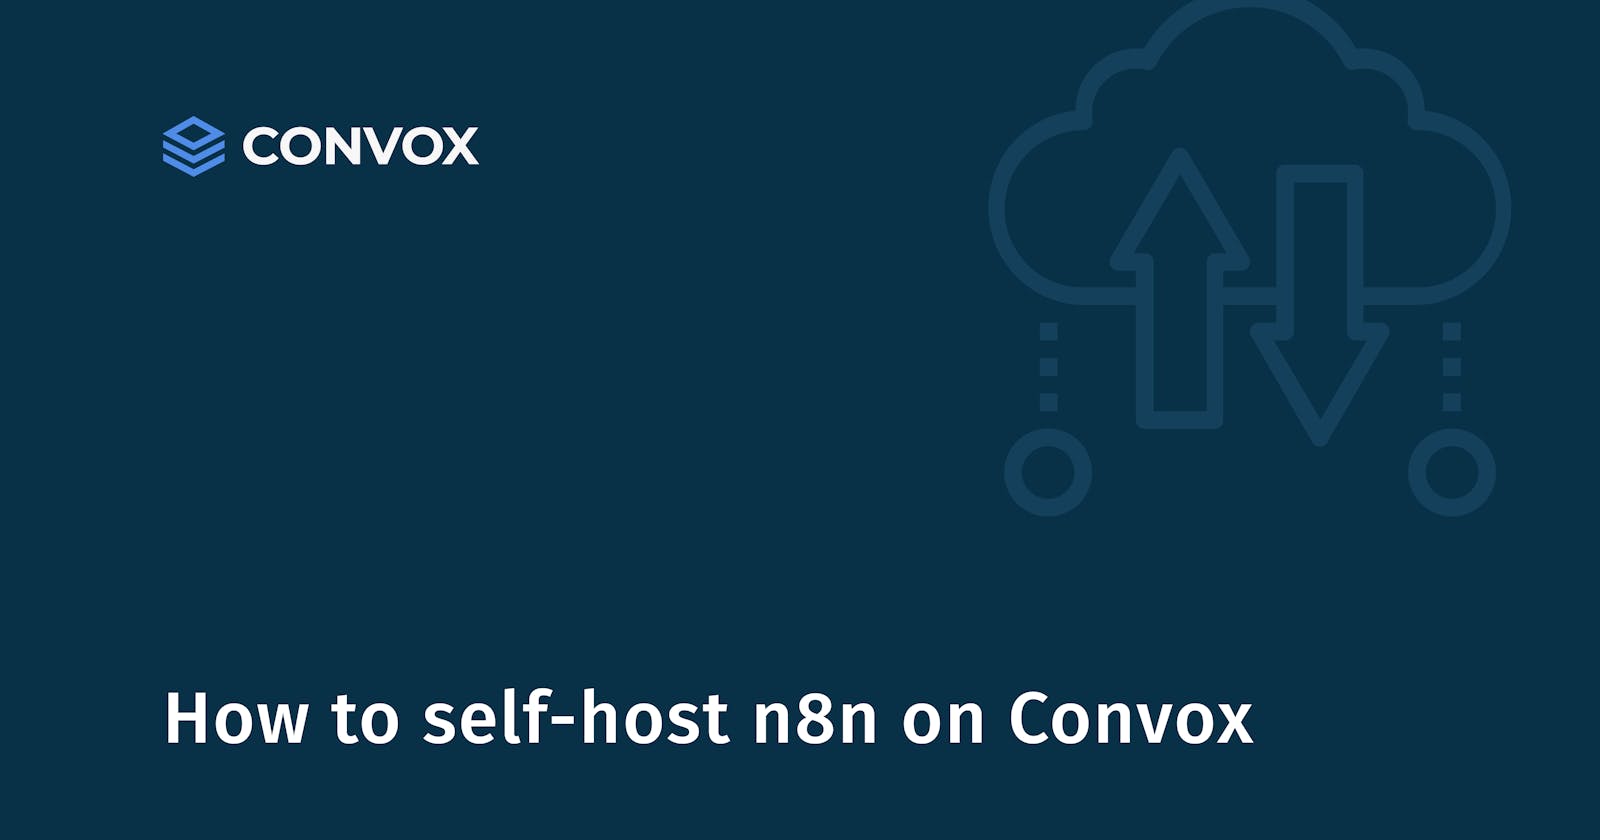 Self-hosted workflow automation: How to self-host n8n on Convox